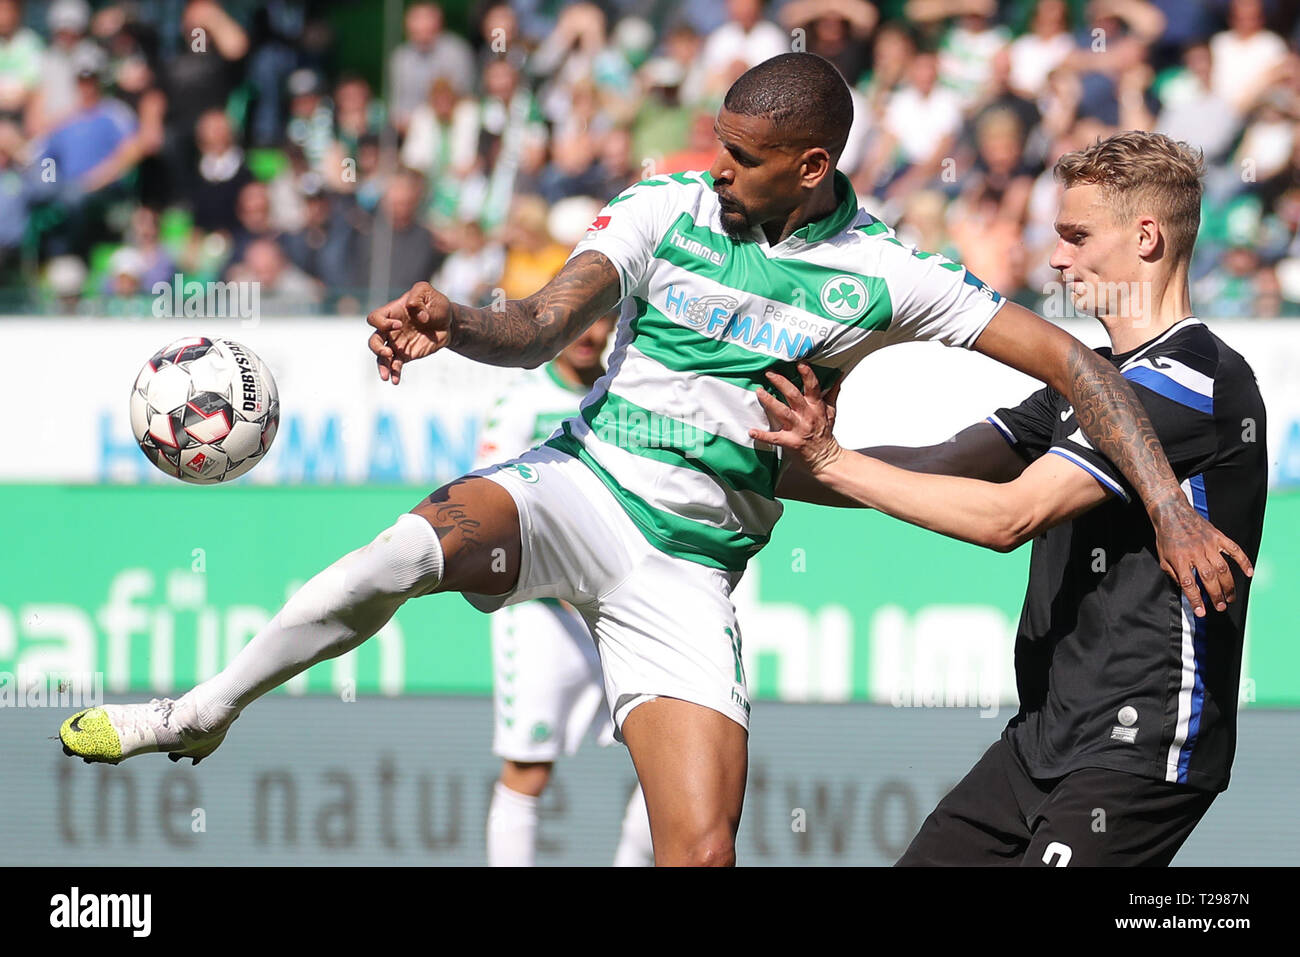 Furth, Germany. 31st Mar, 2019. Soccer: 2nd Bundesliga, SpVgg Greuther Fürth - Arminia Bielefeld, 27th matchday, at the Sportpark Ronhof Thomas Sommer. Daniel Keita-Ruel (l) from Fürth fights for the ball with Amos Pieper from Bielefeld. Photo: Daniel Karmann/dpa - IMPORTANT NOTE: In accordance with the requirements of the DFL Deutsche Fußball Liga or the DFB Deutscher Fußball-Bund, it is prohibited to use or have used photographs taken in the stadium and/or the match in the form of sequence images and/or video-like photo sequences. Credit: dpa picture alliance/Alamy Live News Stock Photo